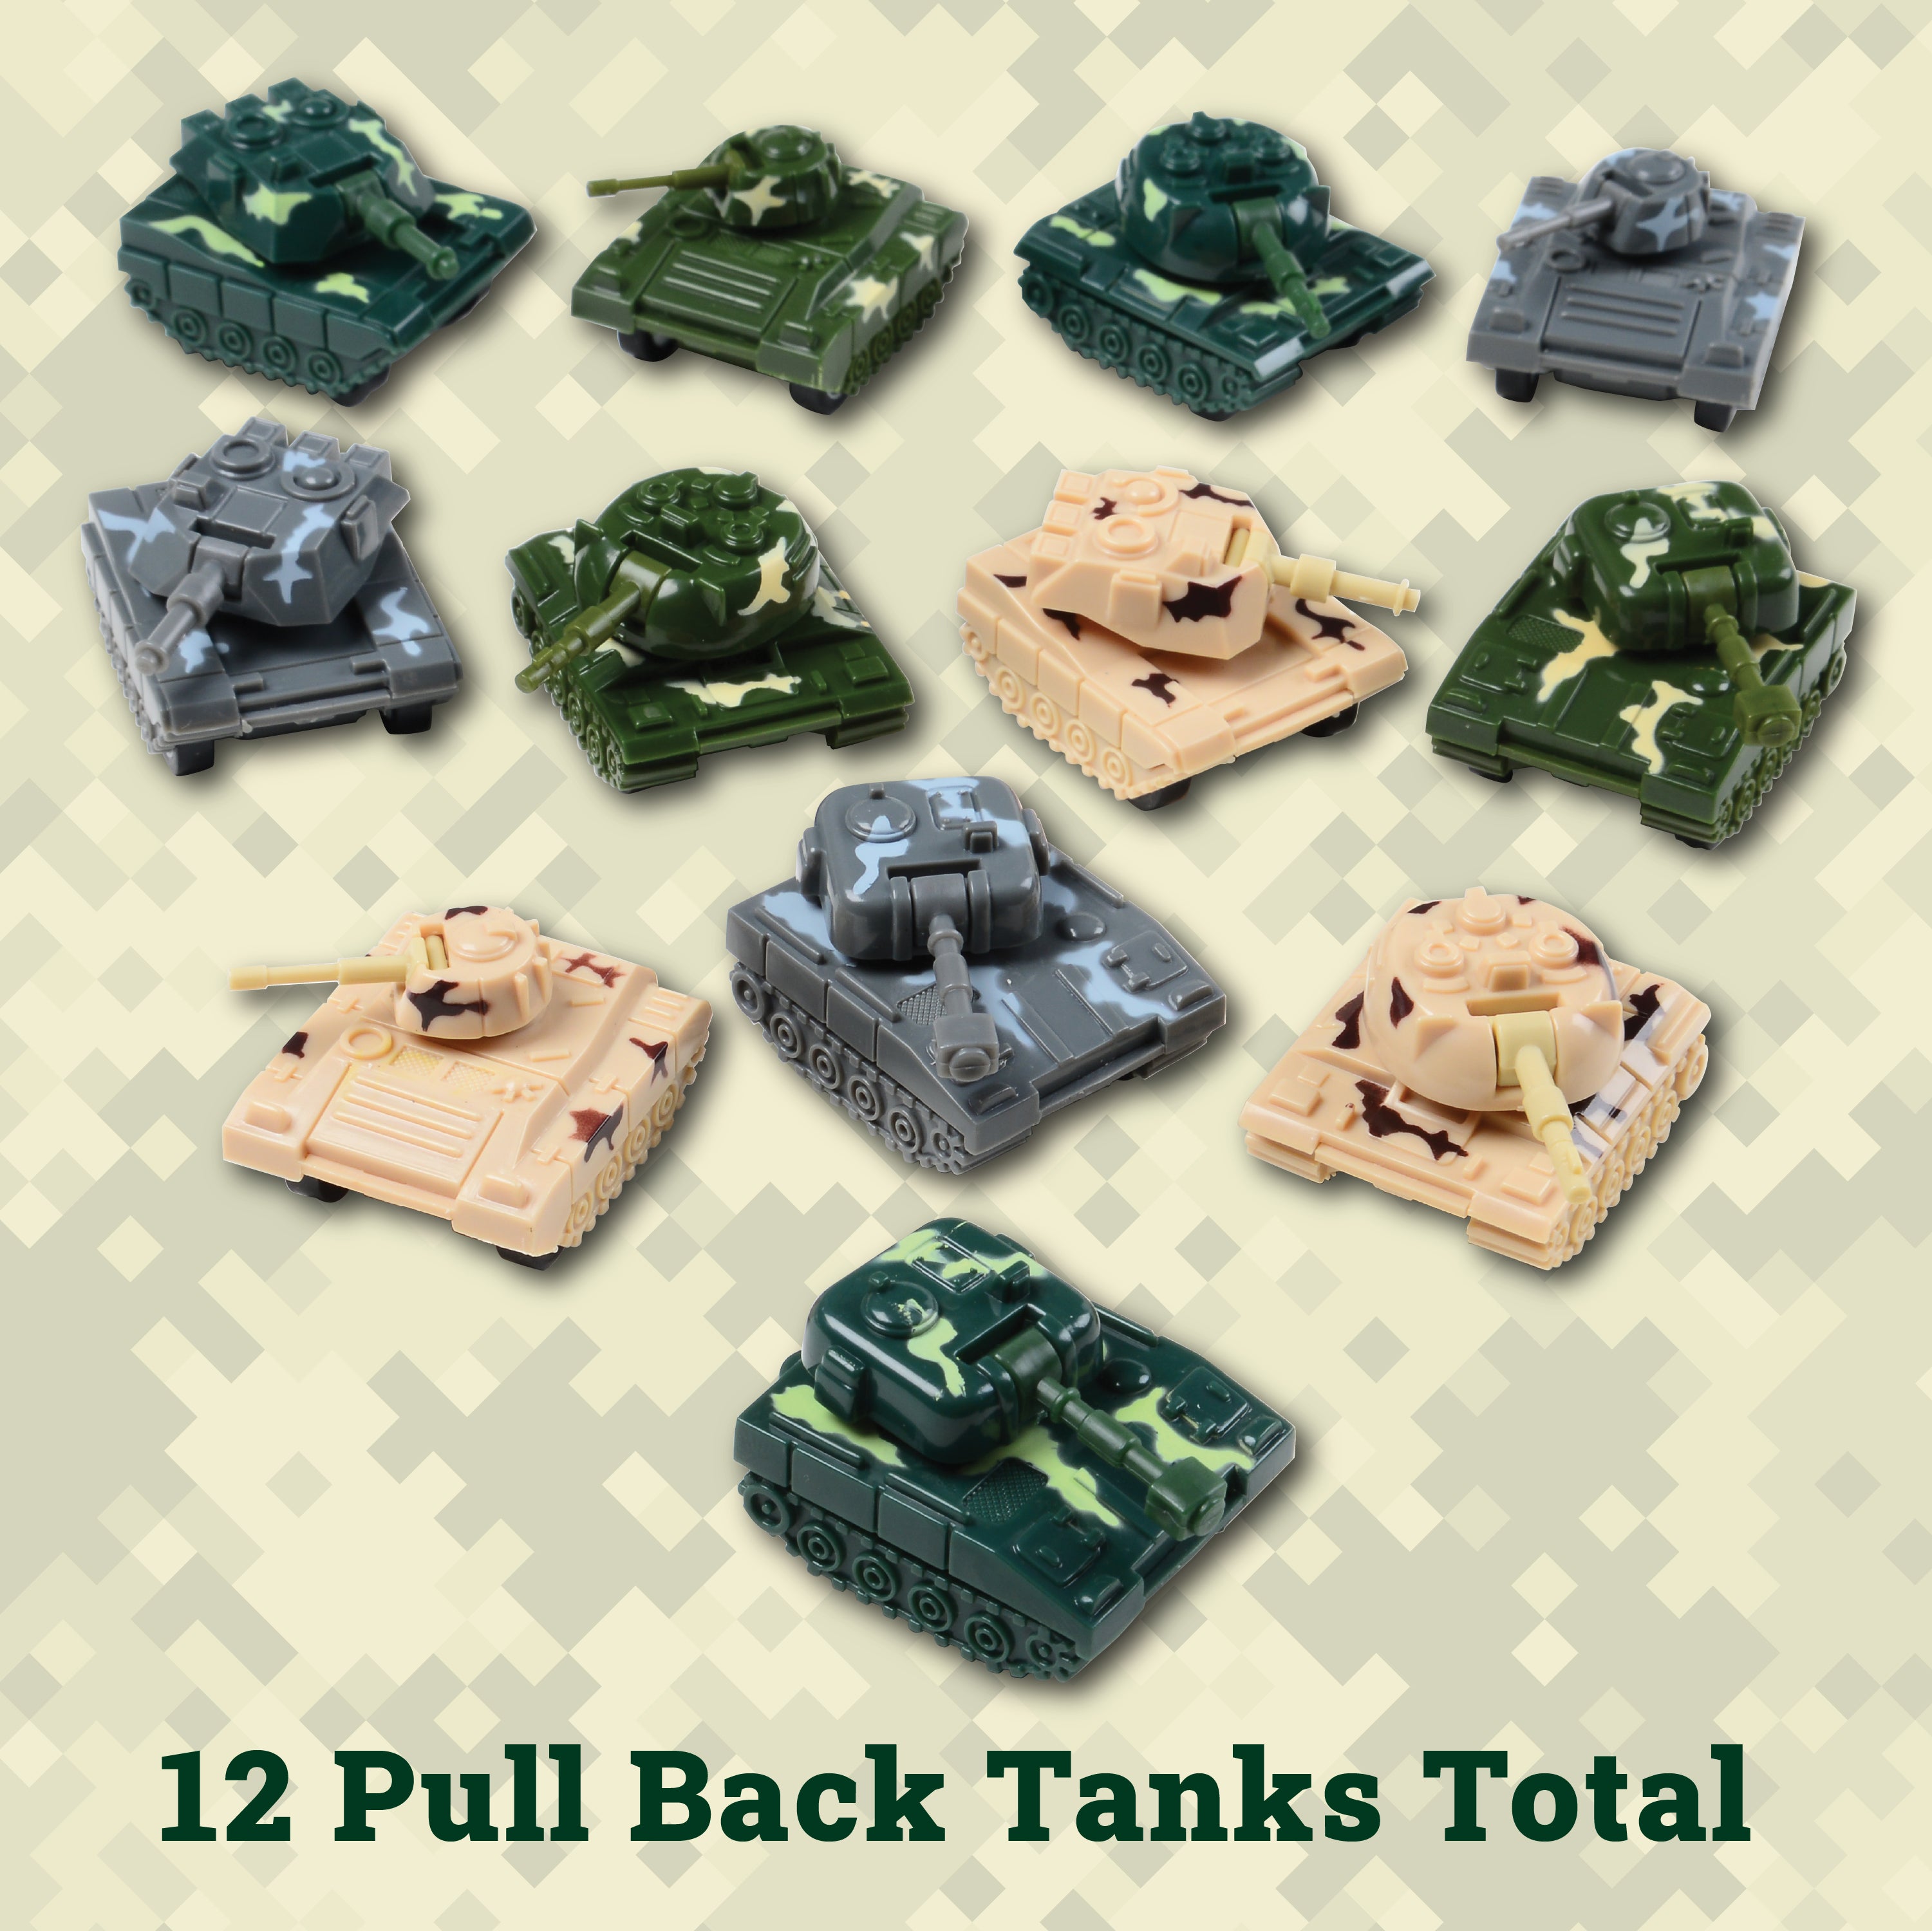 Toy Pullback Tanks (One Dozen) - Only $19.88 at Carnival Source